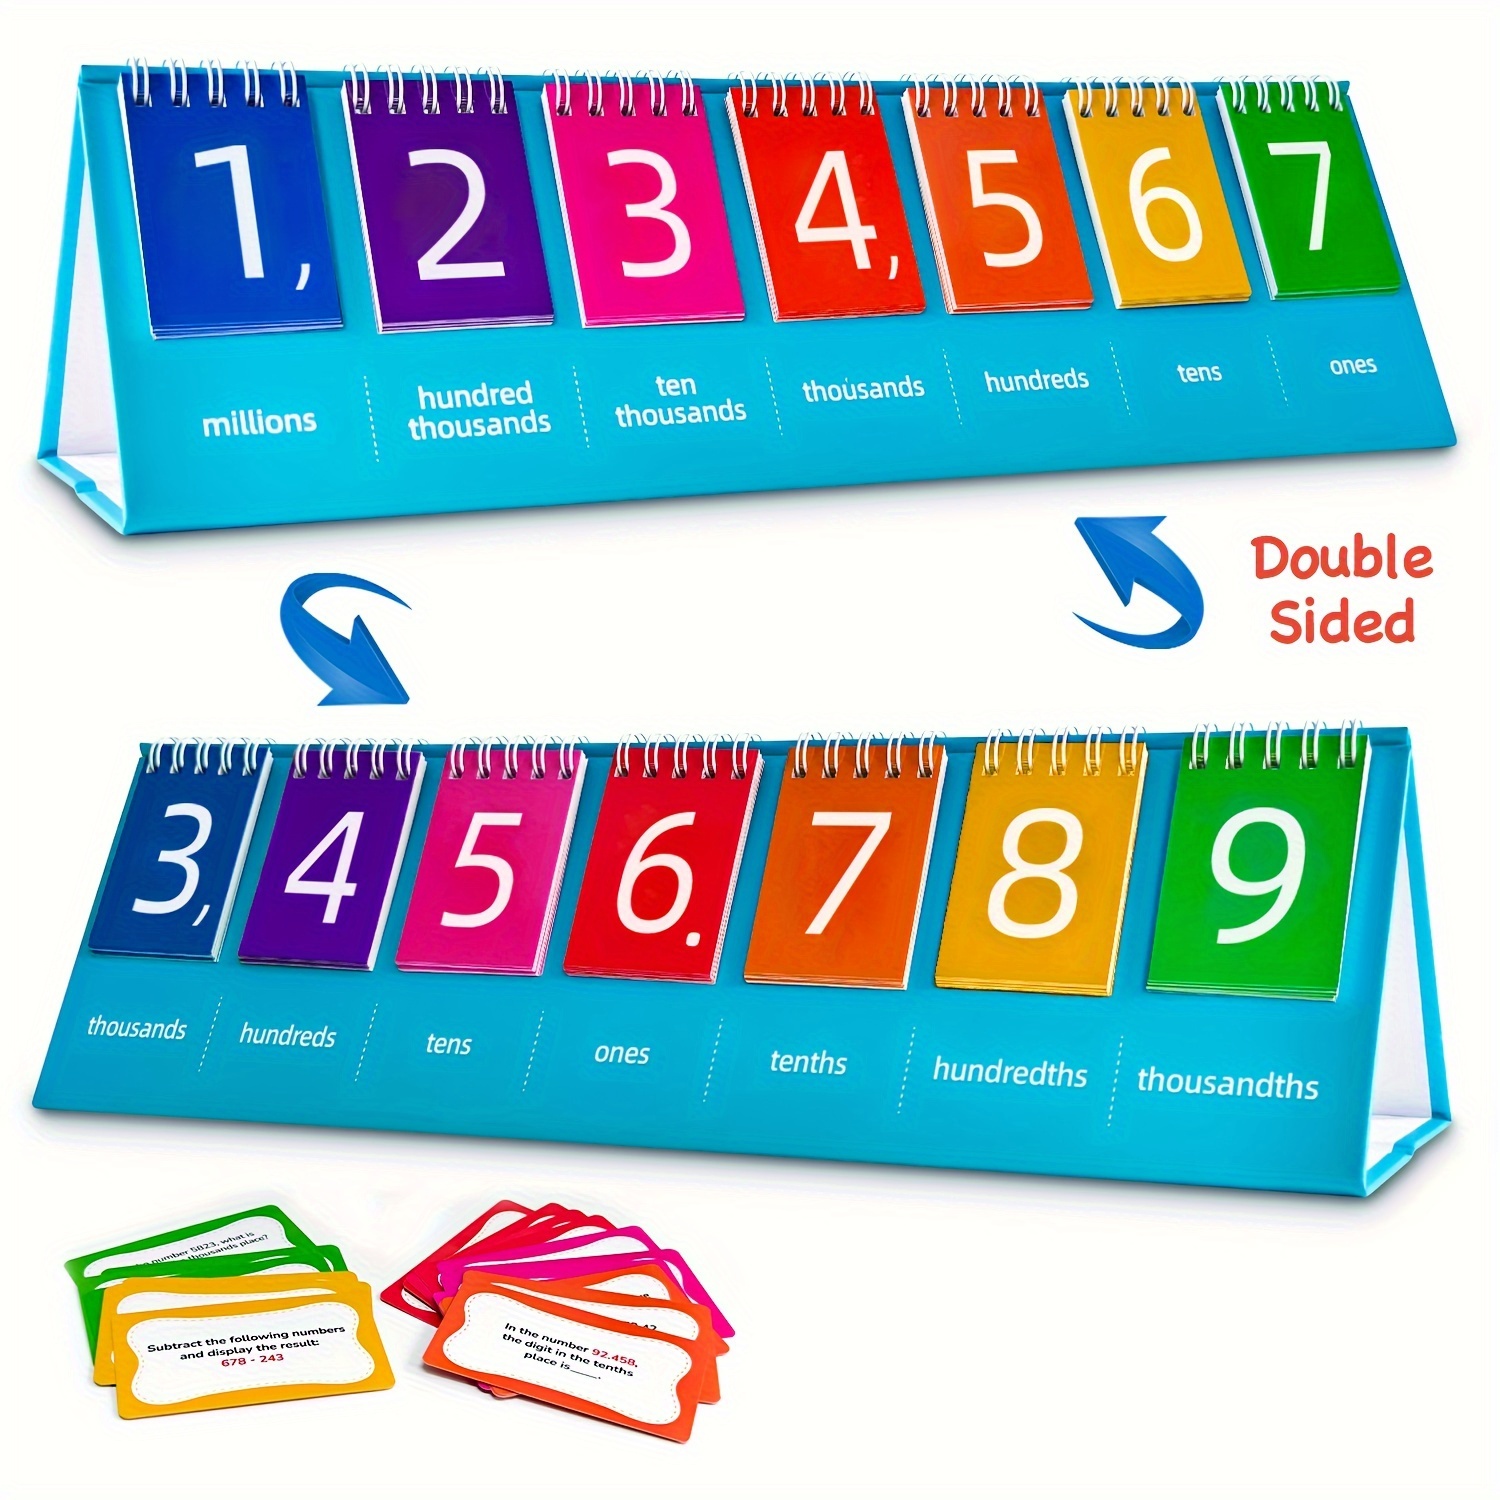 

1pc 7-digit Flip Calendar, With Independent Place Value Hanging Chart, Double-sided Integers And Decimals, Capable Of Calculating Millions Of Place Values. Learning Gift, With 70 Double-sided Cards.